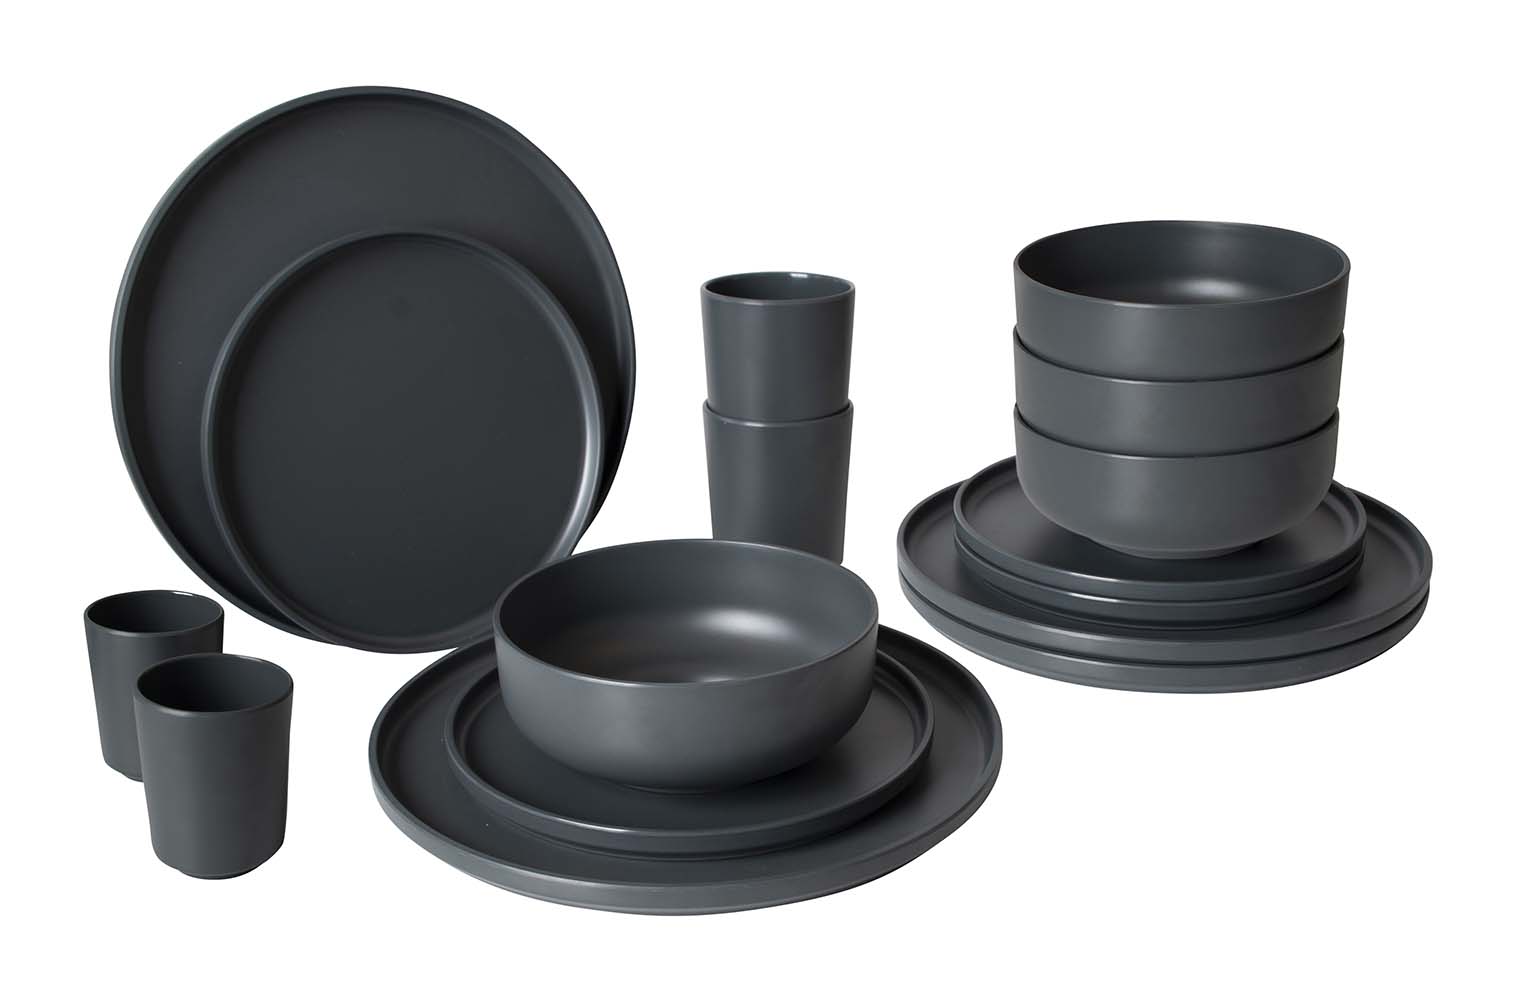 6181462 A trendy 16-piece tableware set made of 100% melamine. Melamine tableware is virtually unbreakable, very lightweight, scratch resistant and dishwasher safe. Suitable for 4 persons and consists of 4 dinner plates, 4 breakfast plates, 4 bowls, 4 mugs. Ideal to take with you to the campsite or in the garden. Food approved.